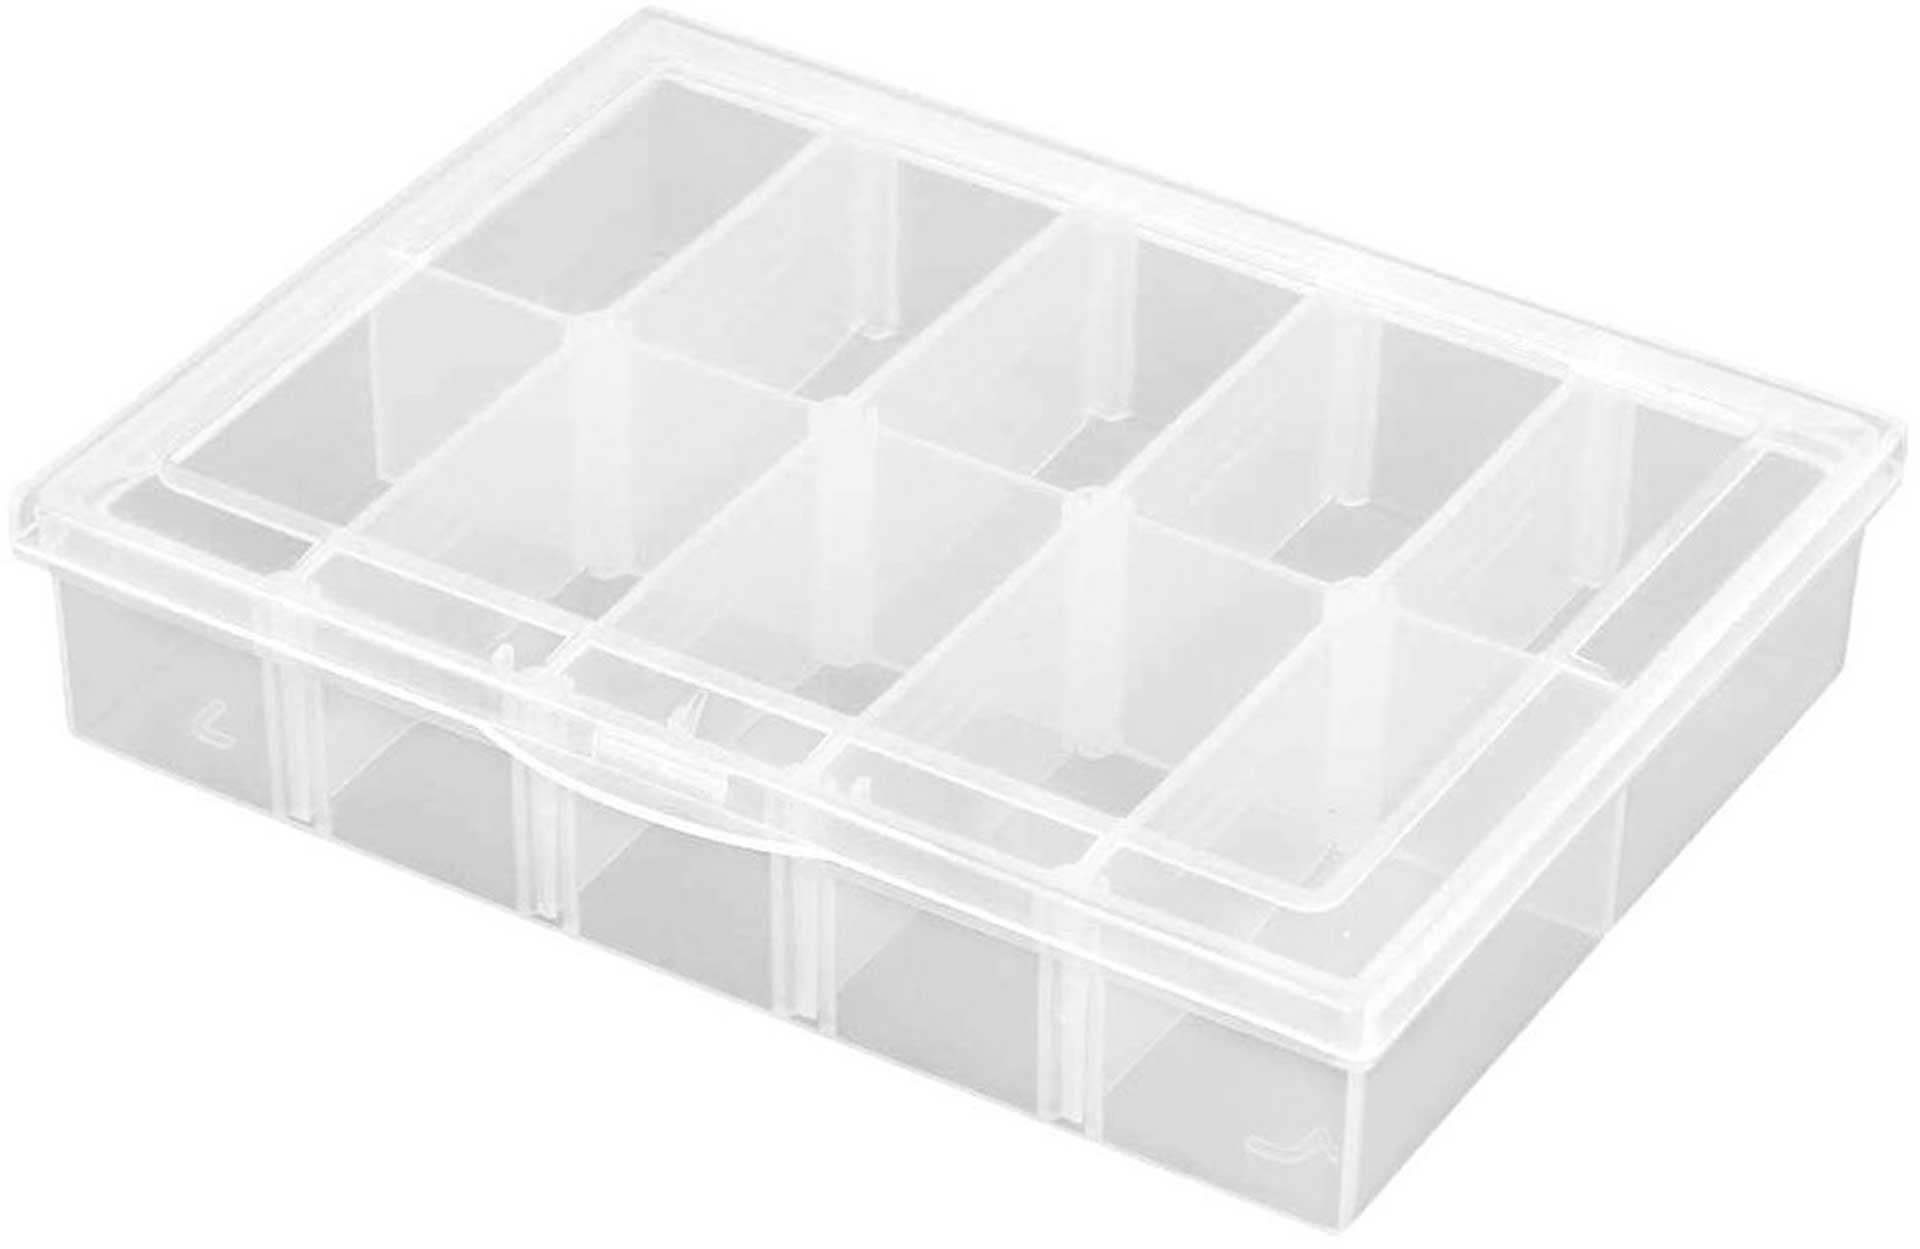 ROBITRONIC ASSORTMENT BOX 10 COMPARTMENTS 134X100X29MM VARIABLE